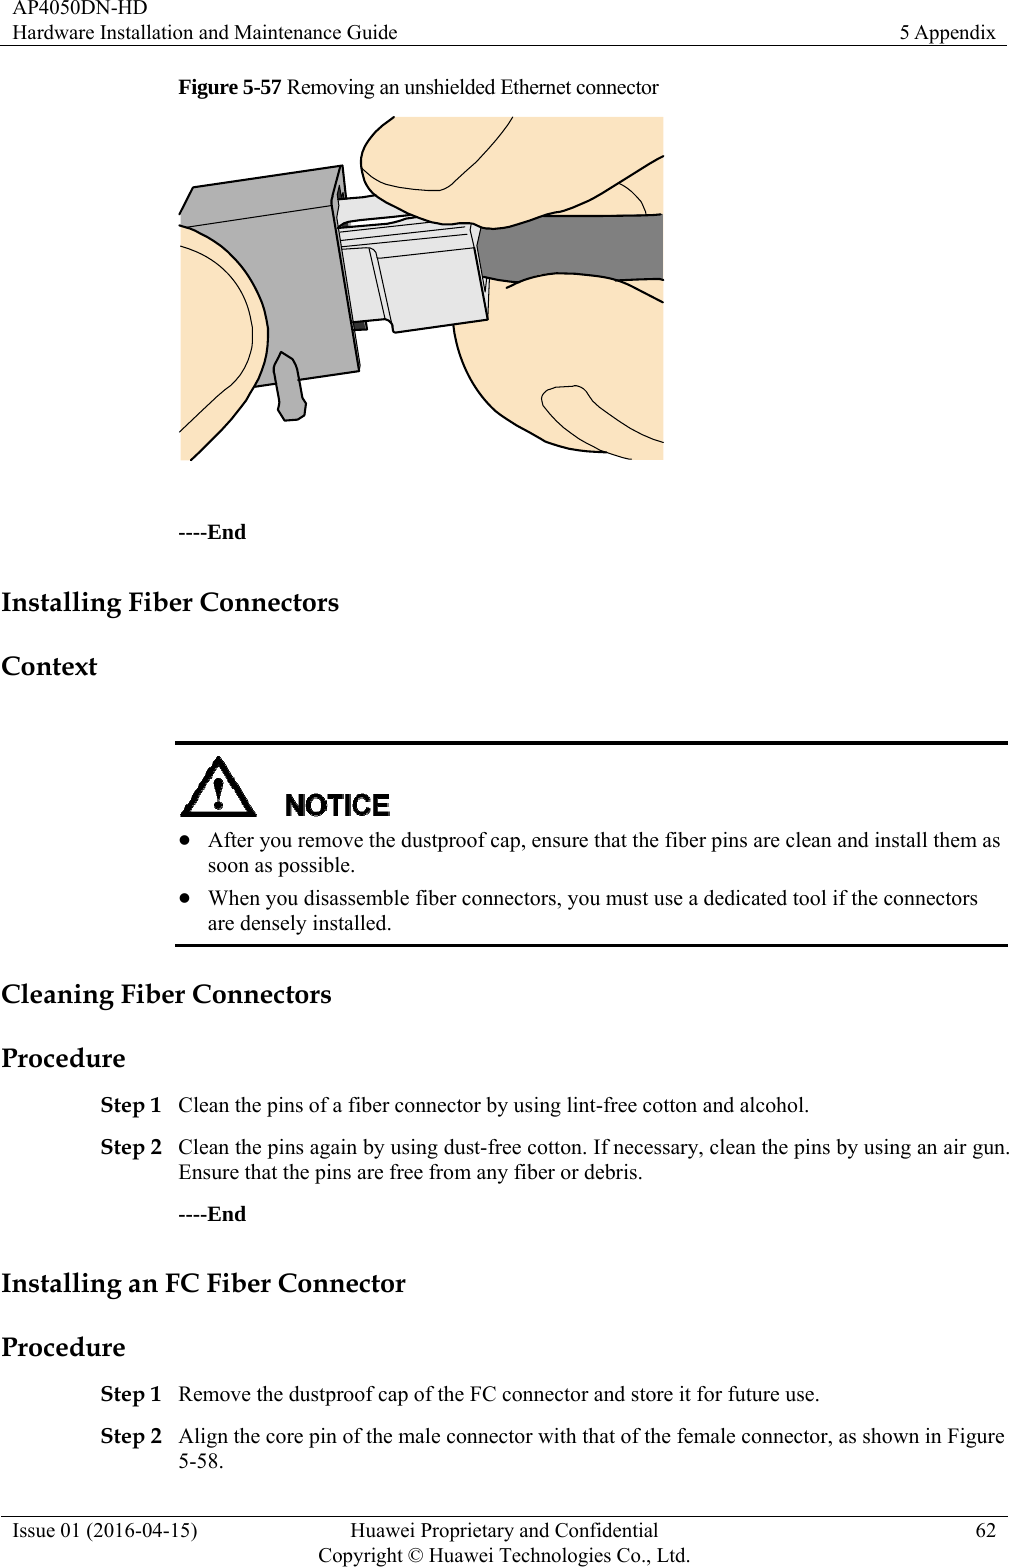 AP4050DN-HD Hardware Installation and Maintenance Guide  5 Appendix Issue 01 (2016-04-15)  Huawei Proprietary and Confidential         Copyright © Huawei Technologies Co., Ltd.62 Figure 5-57 Removing an unshielded Ethernet connector   ----End Installing Fiber Connectors Context    After you remove the dustproof cap, ensure that the fiber pins are clean and install them as soon as possible.  When you disassemble fiber connectors, you must use a dedicated tool if the connectors are densely installed. Cleaning Fiber Connectors Procedure Step 1 Clean the pins of a fiber connector by using lint-free cotton and alcohol. Step 2 Clean the pins again by using dust-free cotton. If necessary, clean the pins by using an air gun. Ensure that the pins are free from any fiber or debris. ----End Installing an FC Fiber Connector Procedure Step 1 Remove the dustproof cap of the FC connector and store it for future use. Step 2 Align the core pin of the male connector with that of the female connector, as shown in Figure 5-58. 